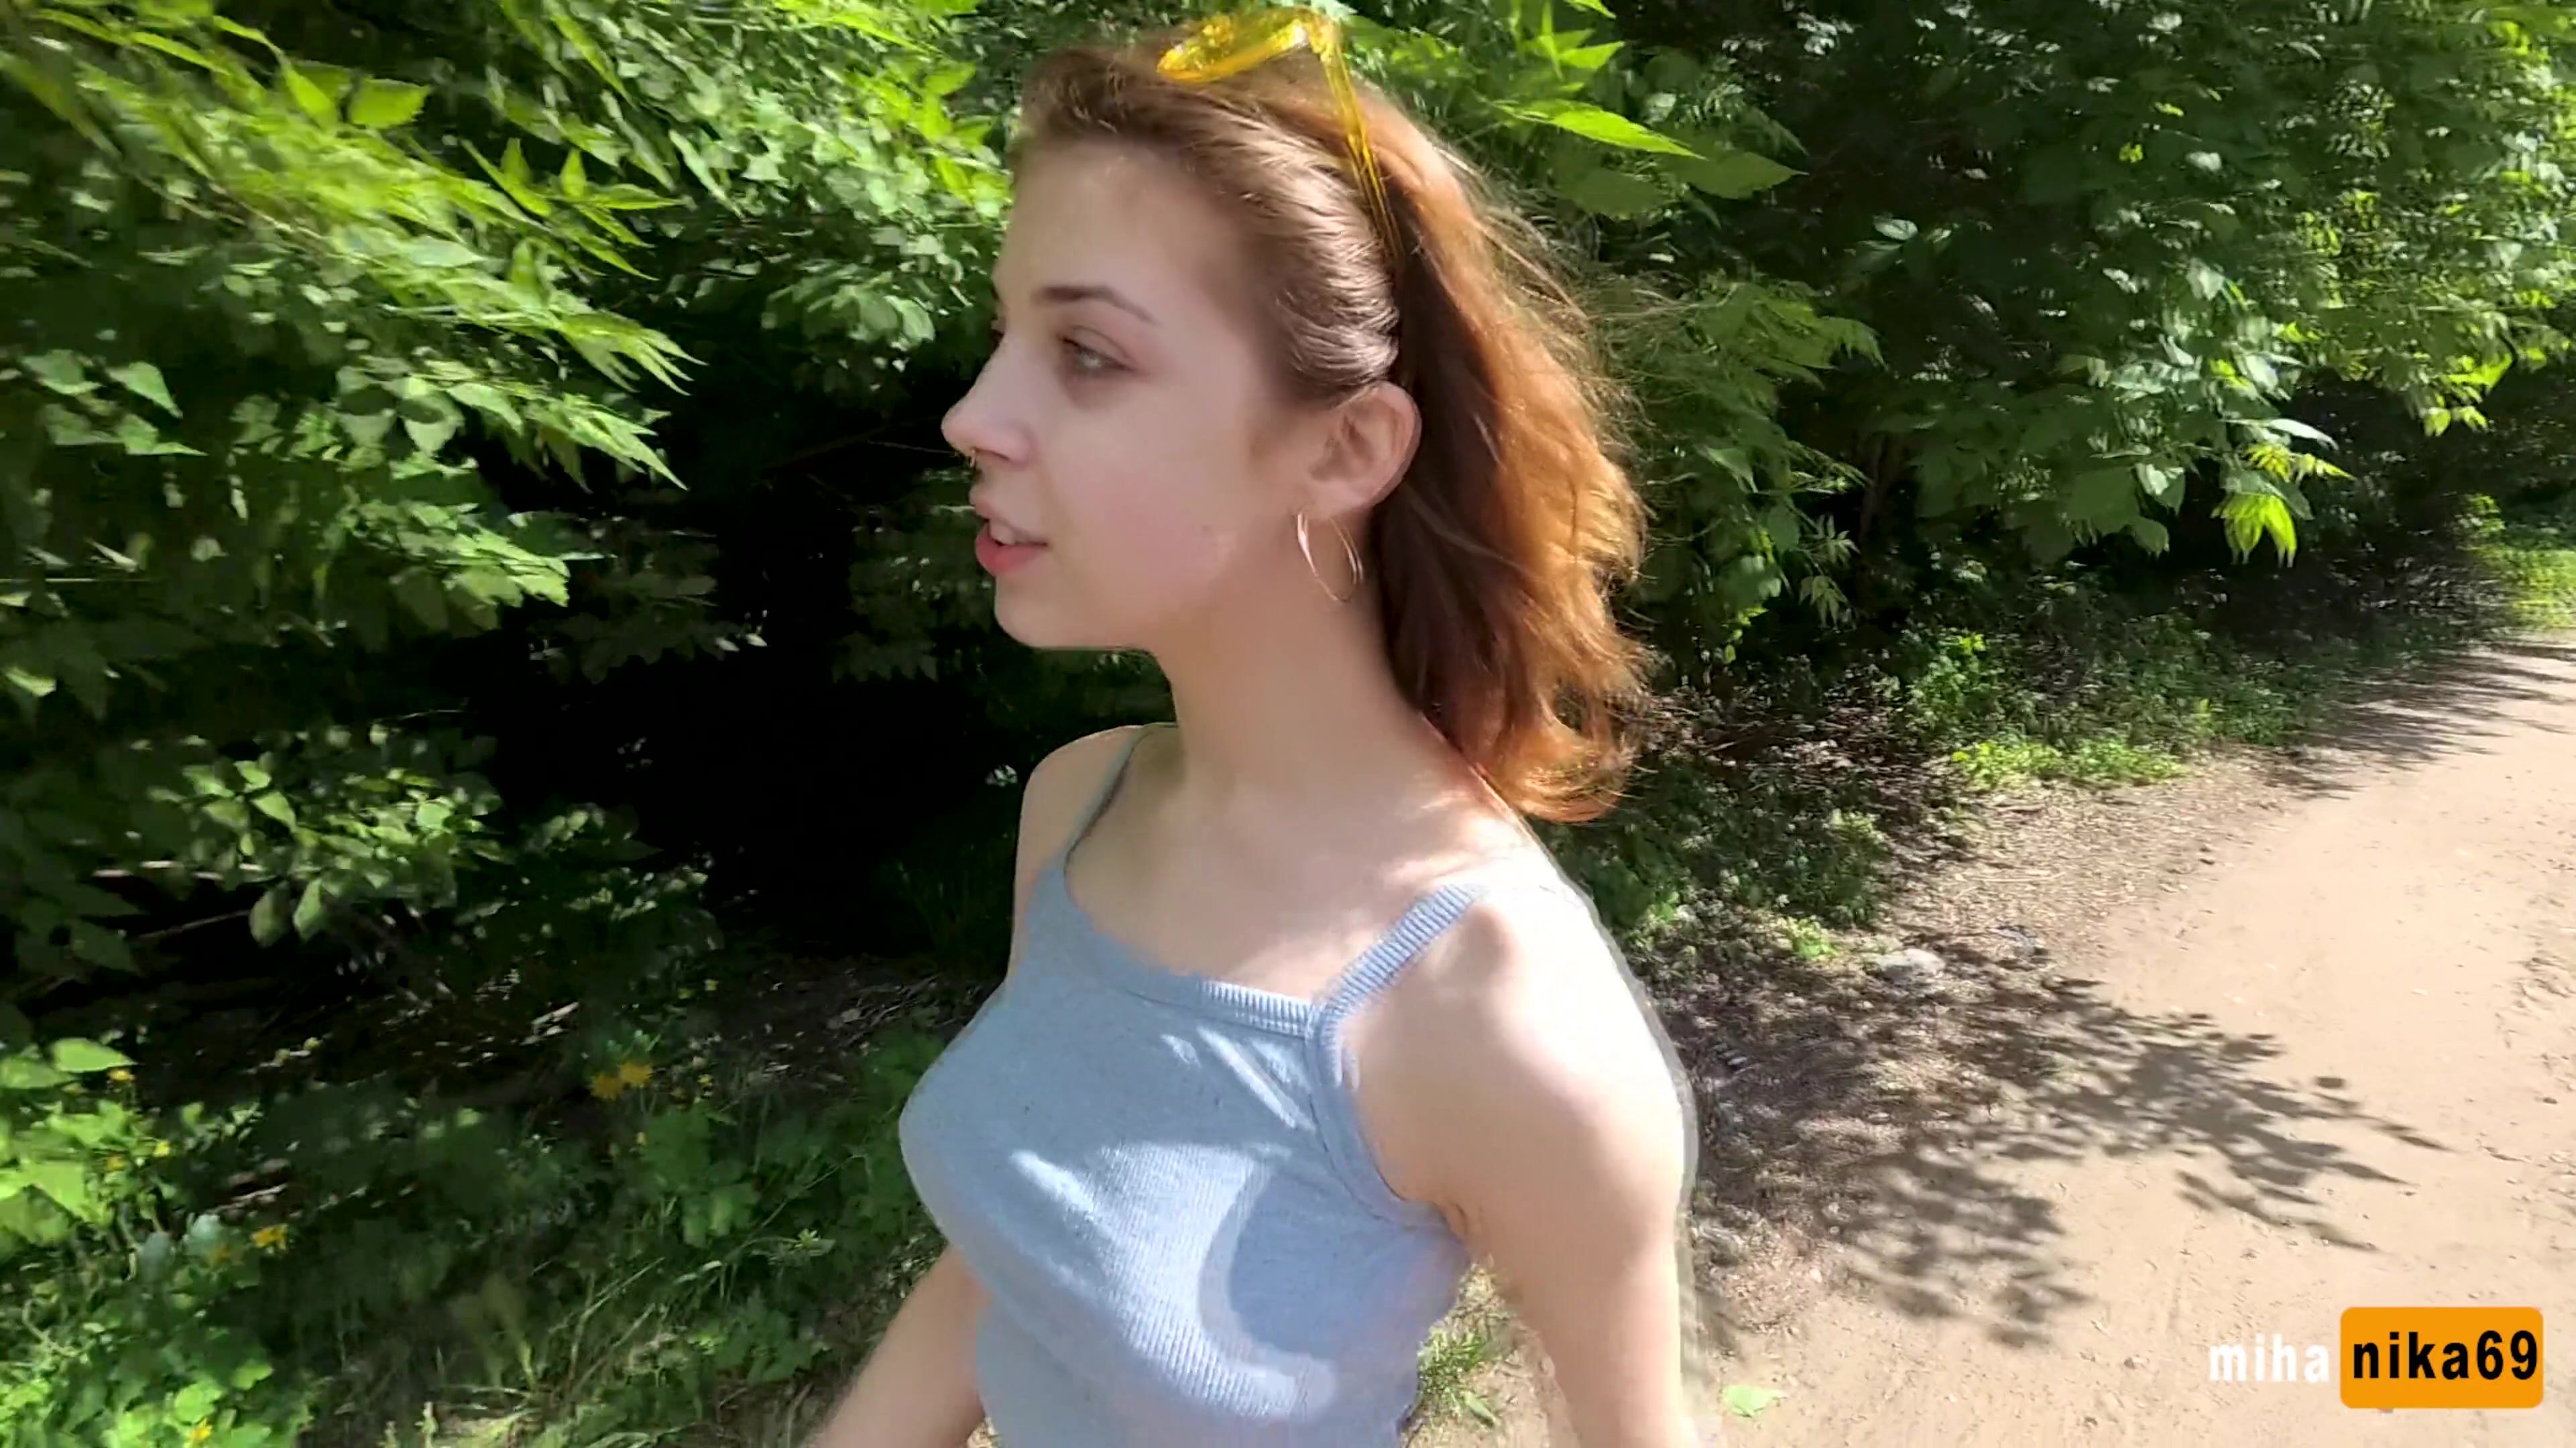 Miha Nika69 - I Want To Fuck Right Now\u00a1 Let's Go To The Park - Outdoor Pov